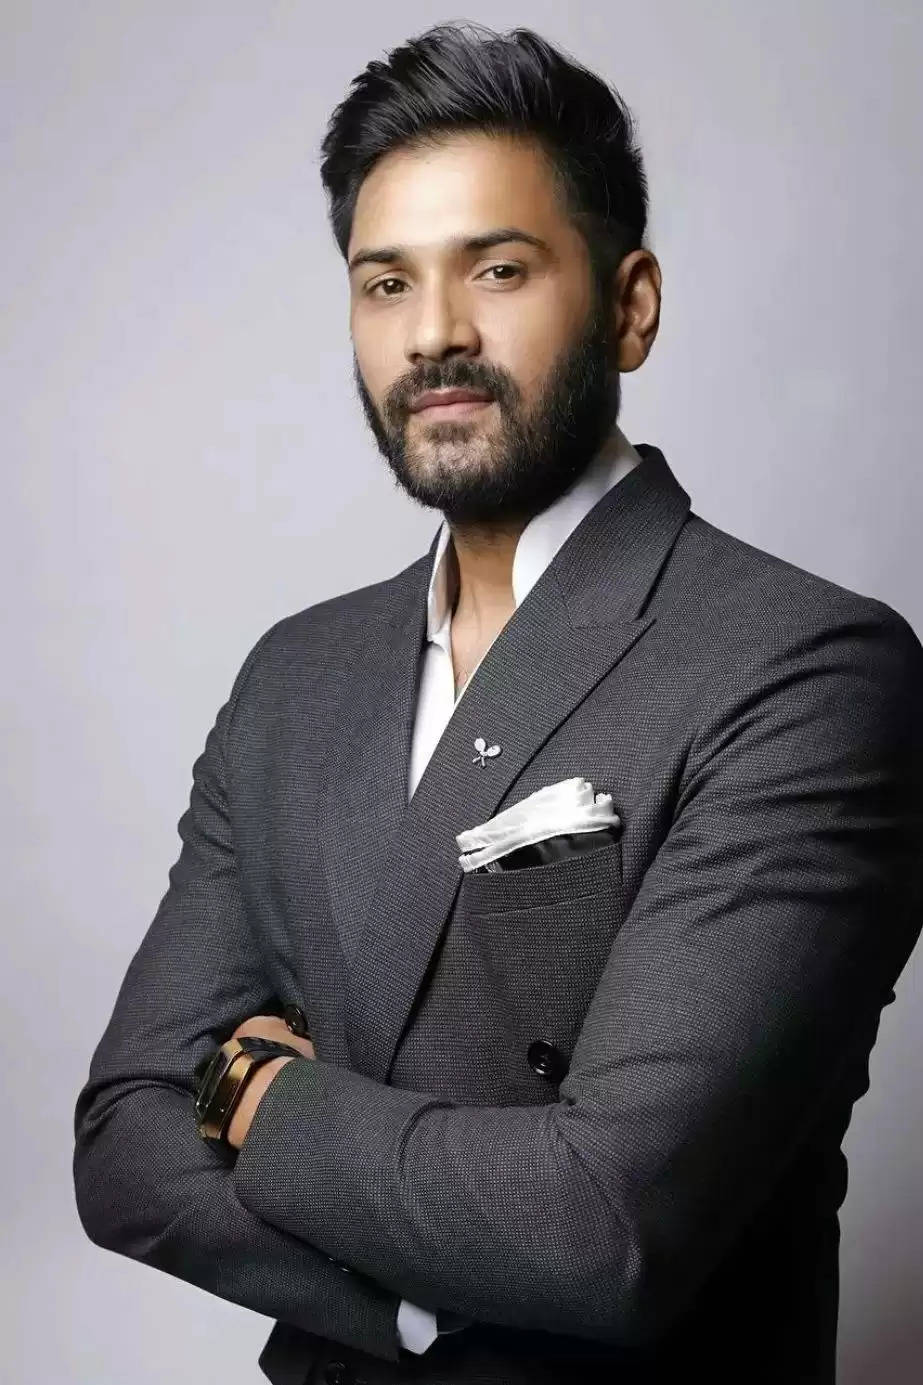 Actor Mrunal Jain says that it is very important to honour the women properly in our lives. He adds that he makes sure the women in his family feel treasures.